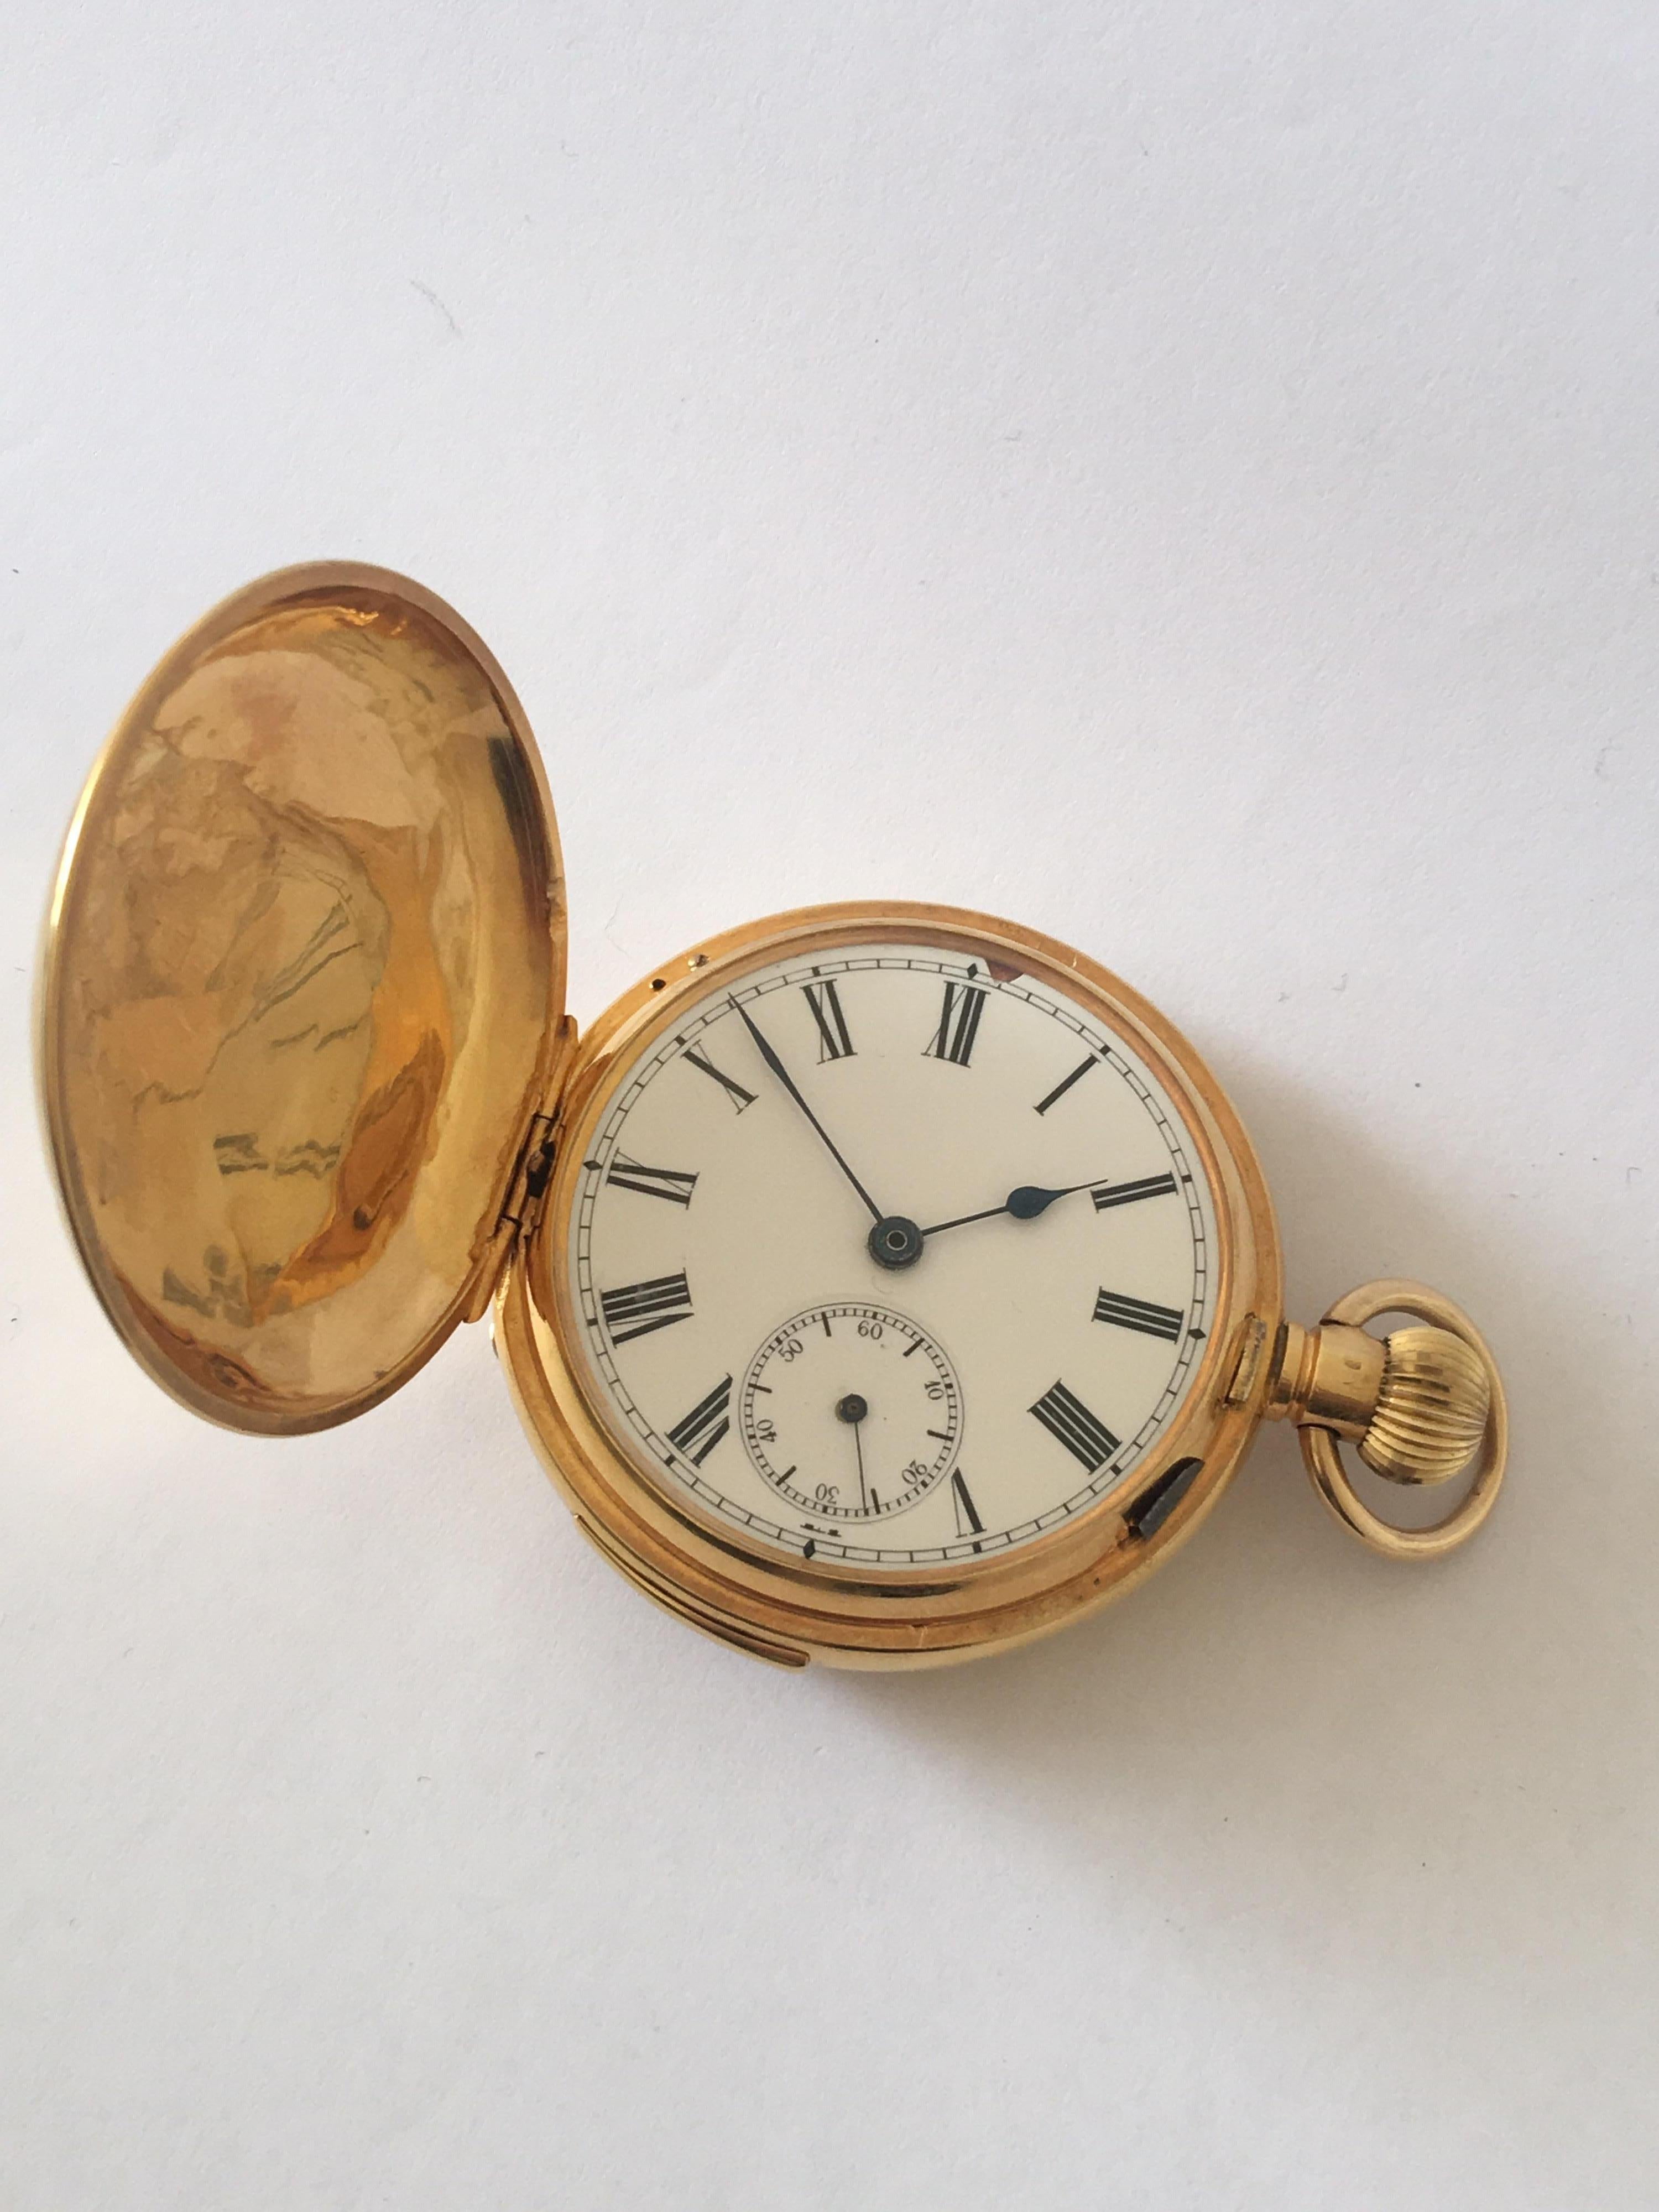 Antique 18K Gold Quarter Repeater Full Hunter Pocket Watch.

This beautiful 51mm diameter full hunter hand winding gold pocket watch is in good working condition and it is running well. It is recently been serviced. Visible signs of ageing and wear